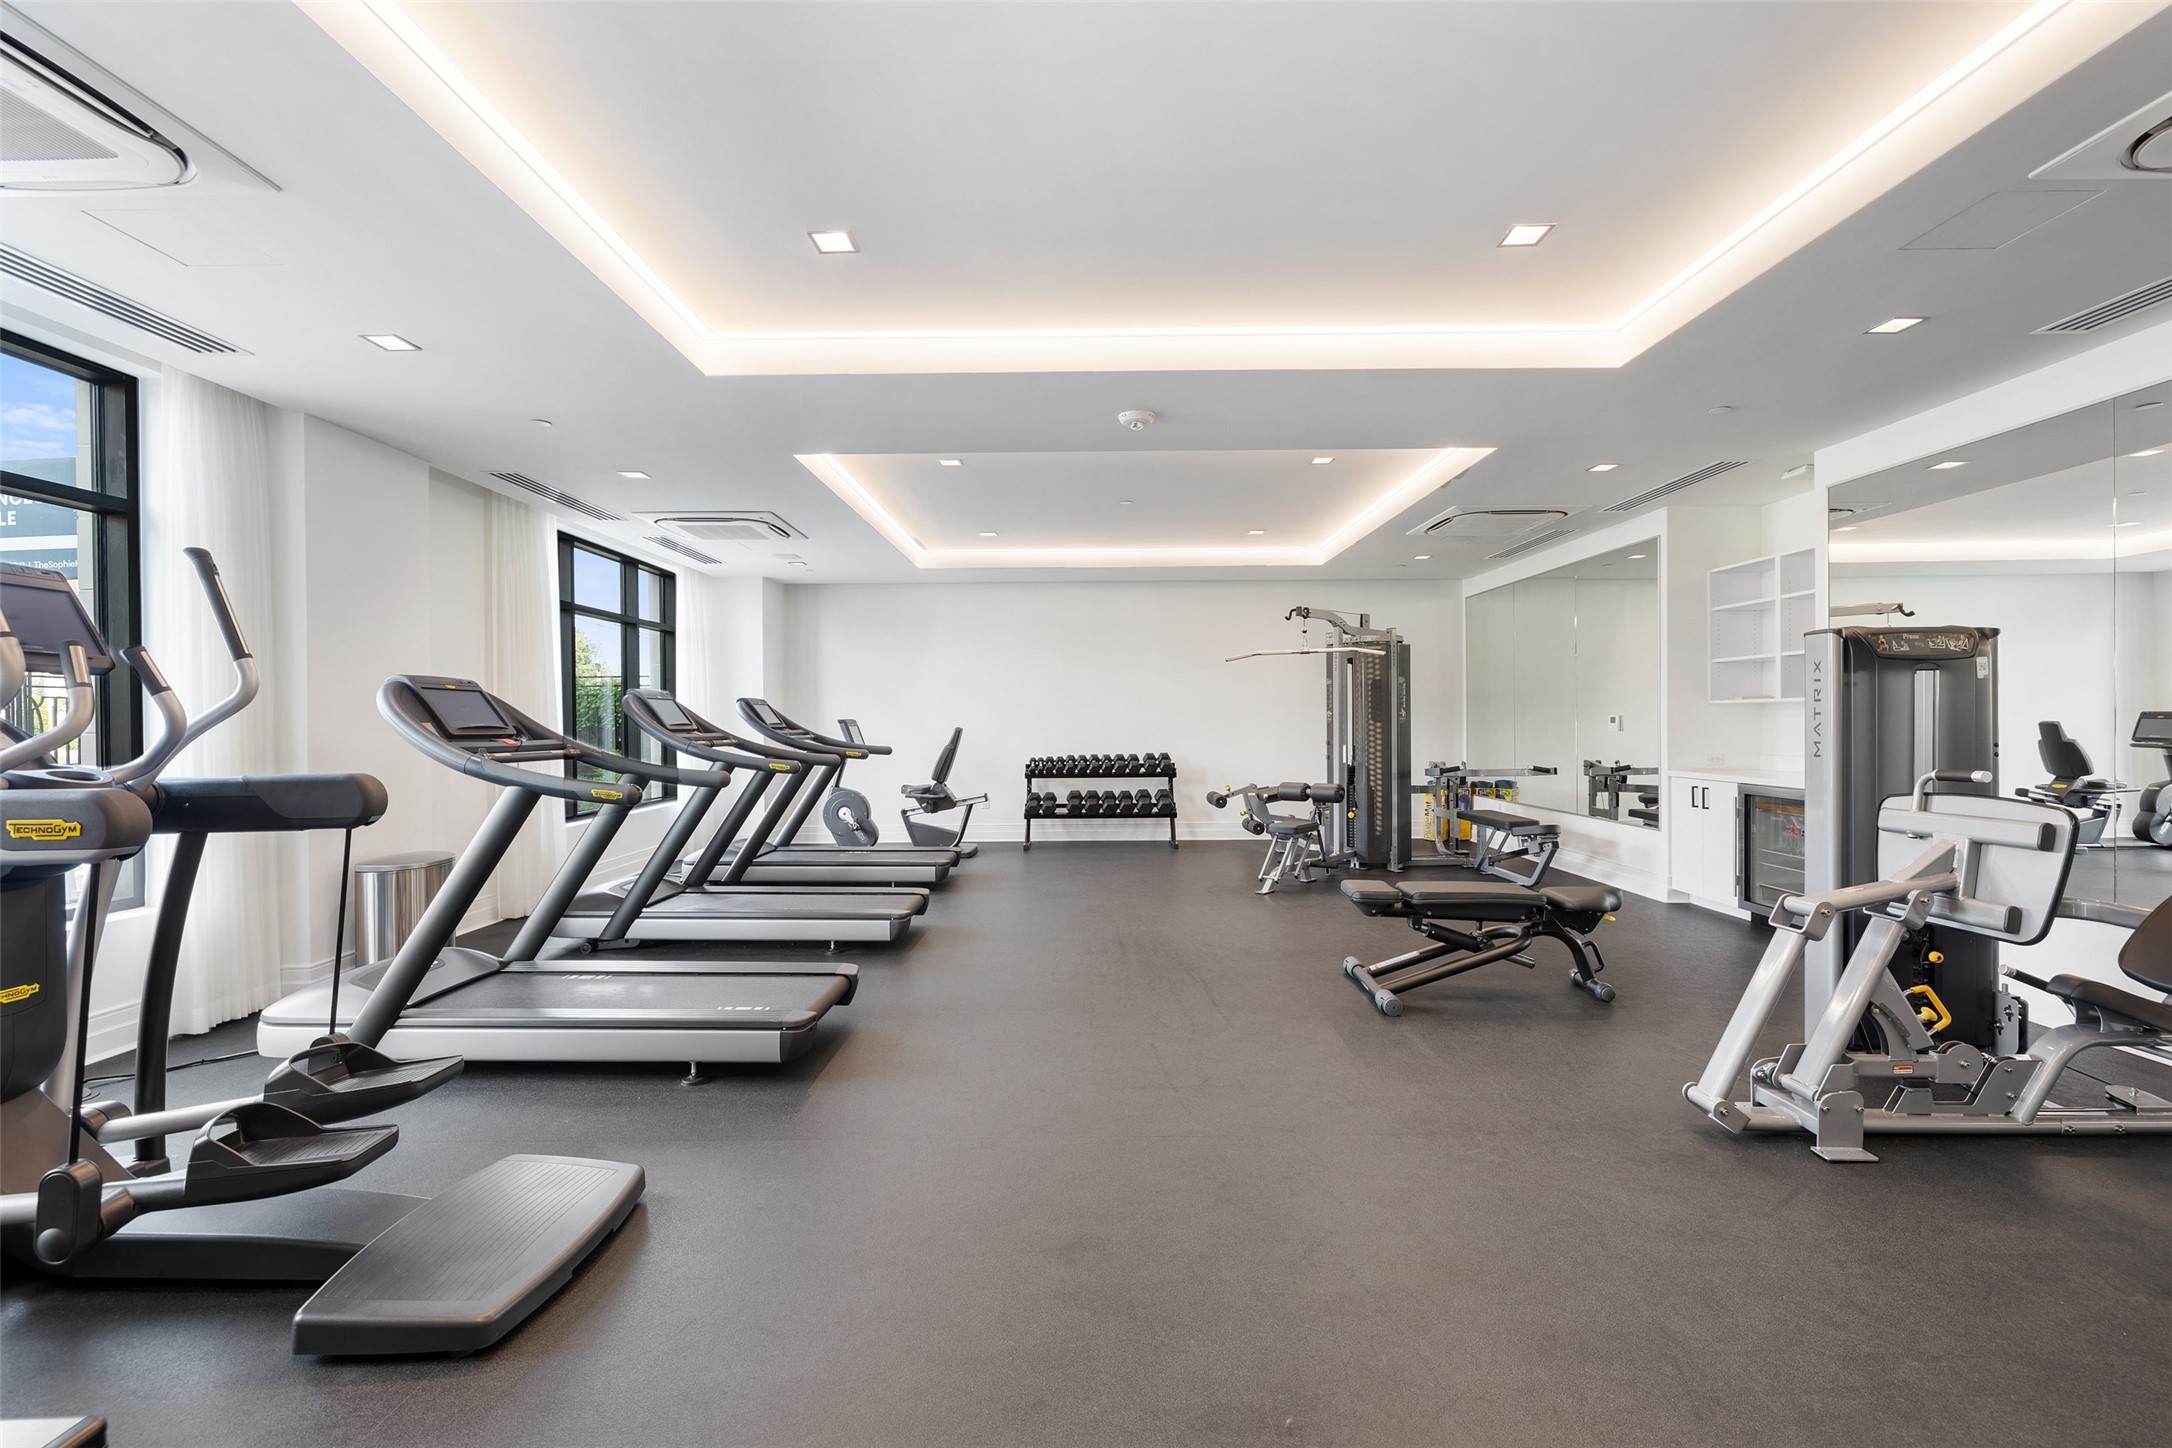 The Fitness Center has all the equipment one can need to maintain health and wellness.